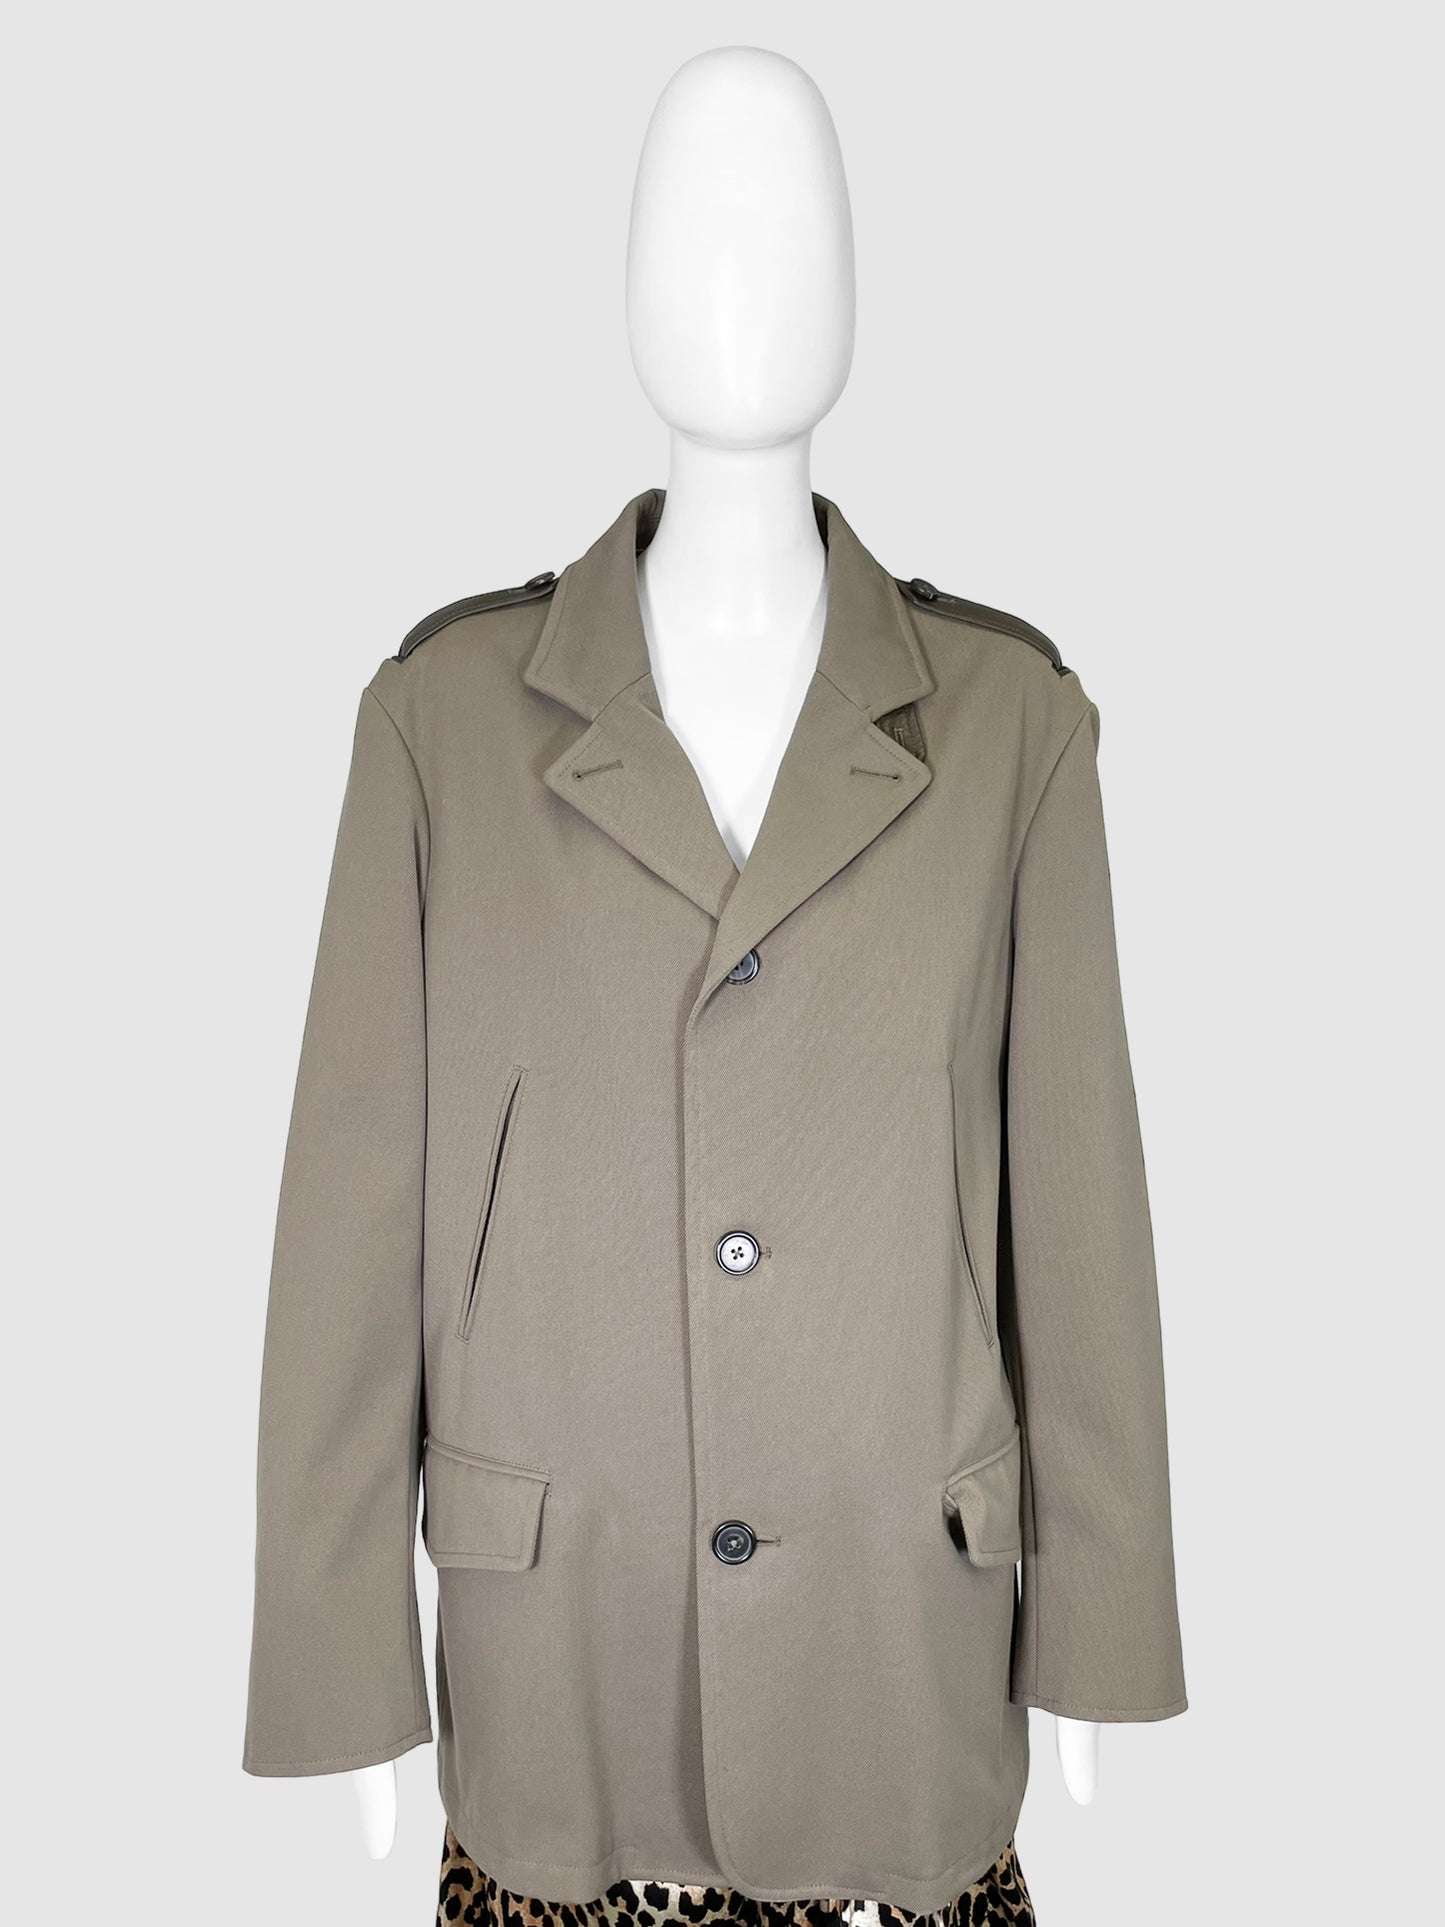 Button-Up Jacket - Size 52